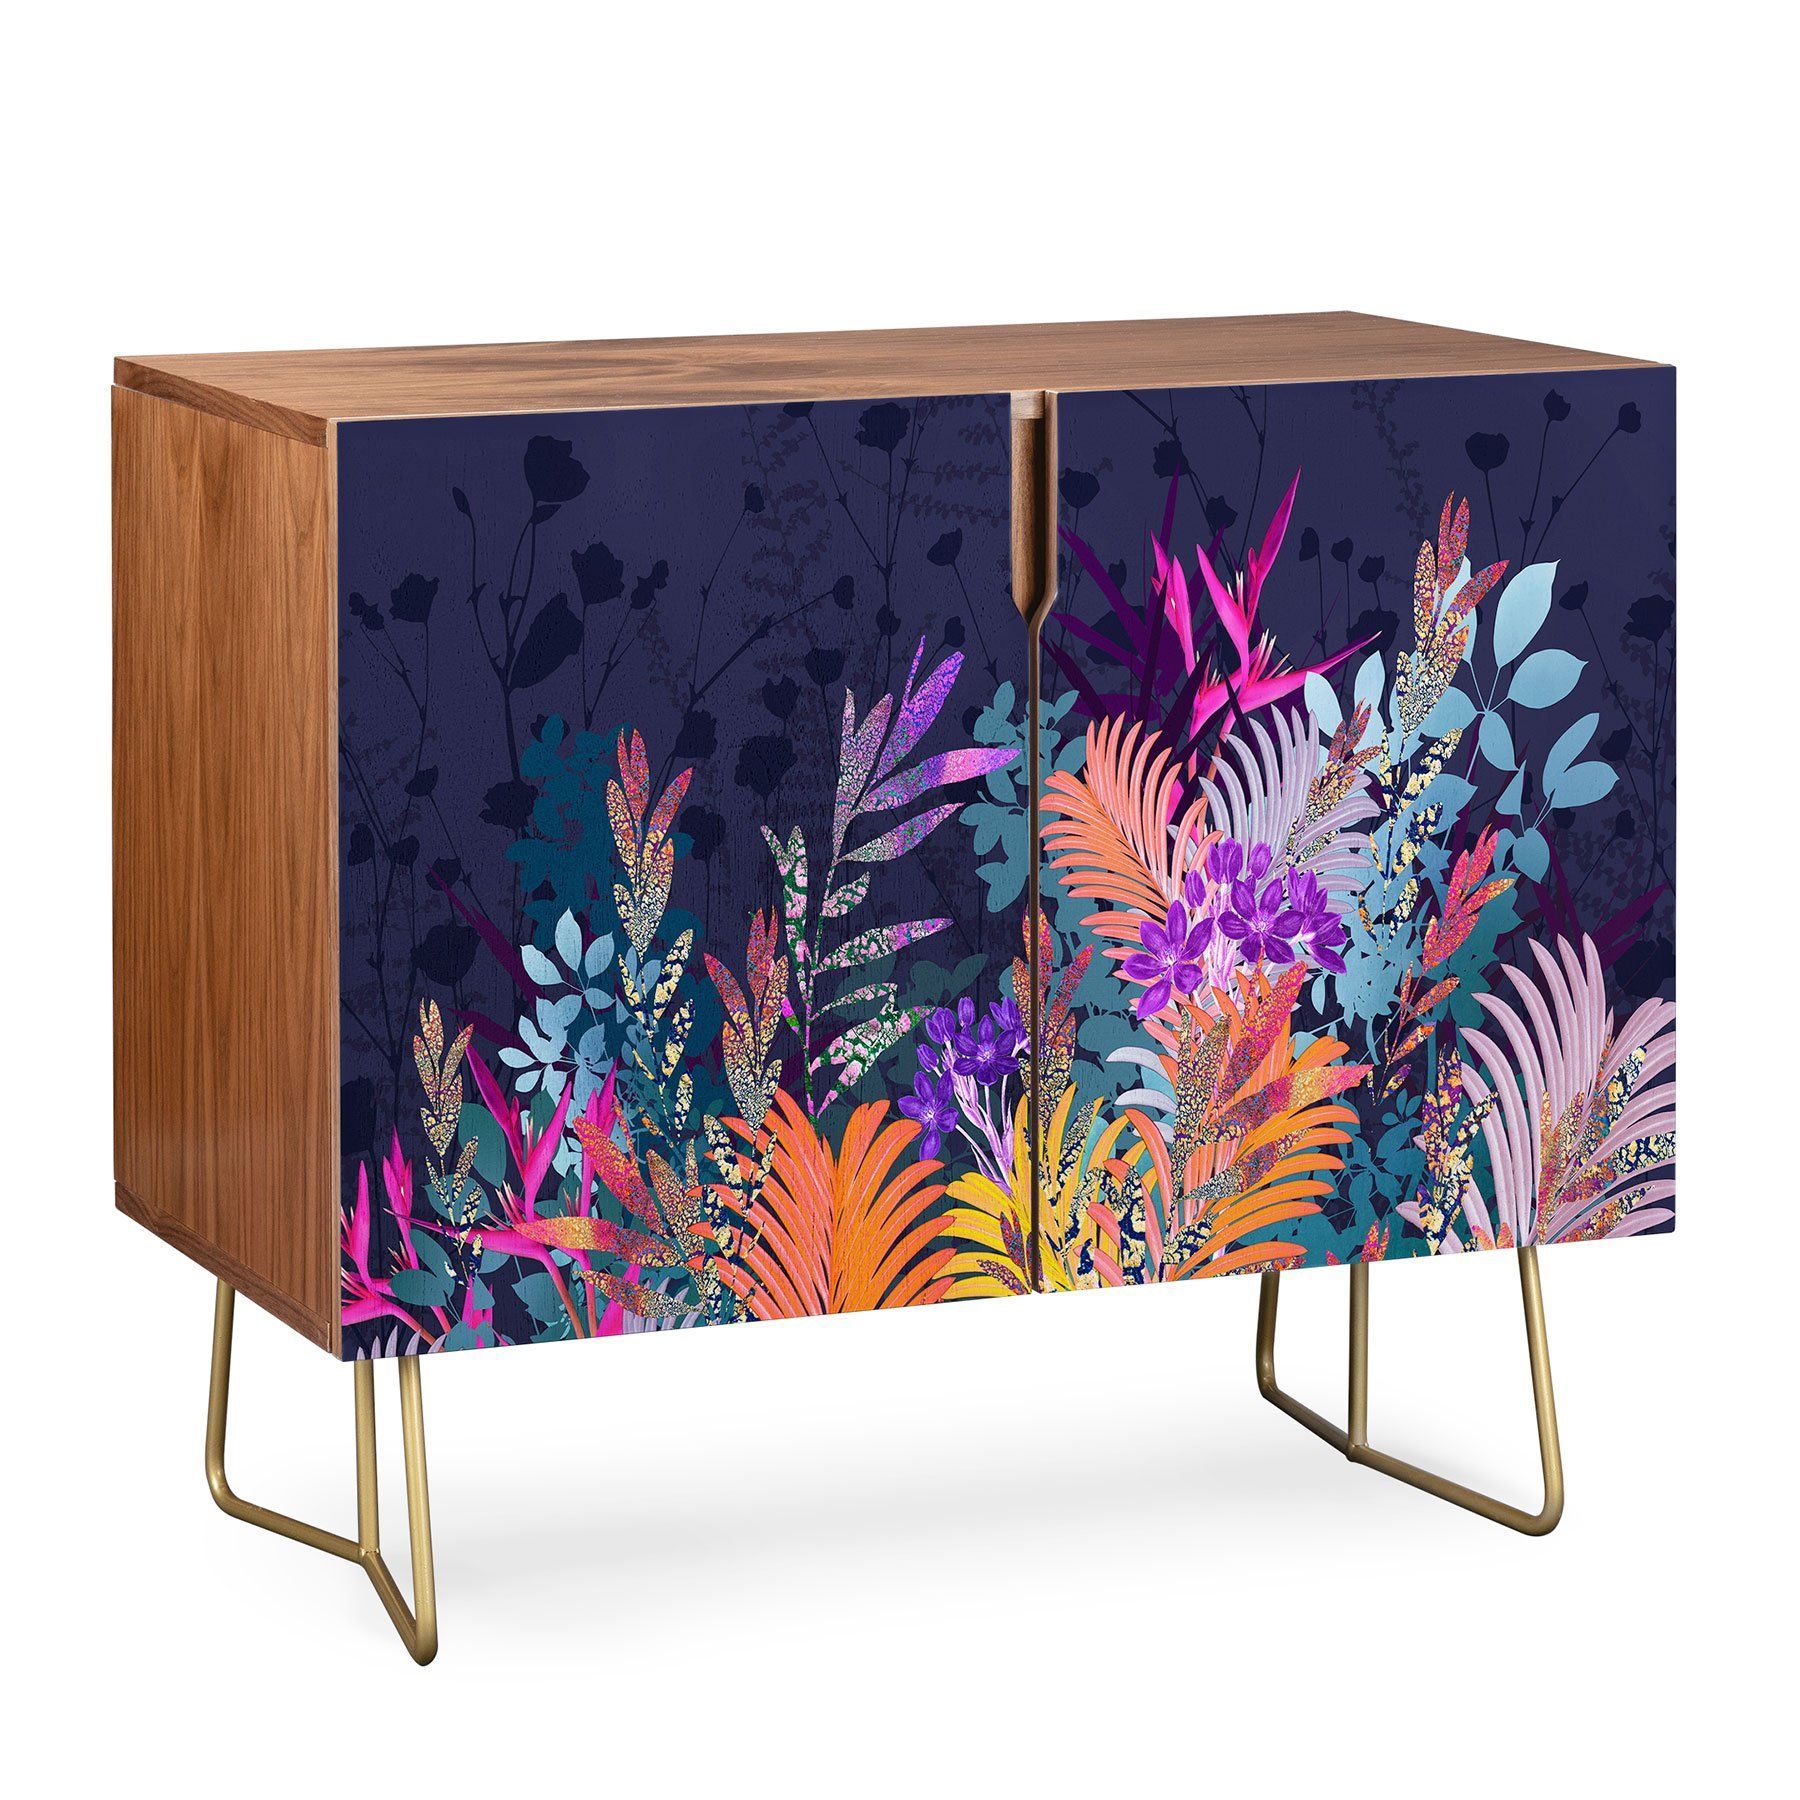 Iveta Abolina Anabelle Credenza In 2019 | Decor | Credenza With Floral Beauty Credenzas (View 7 of 30)